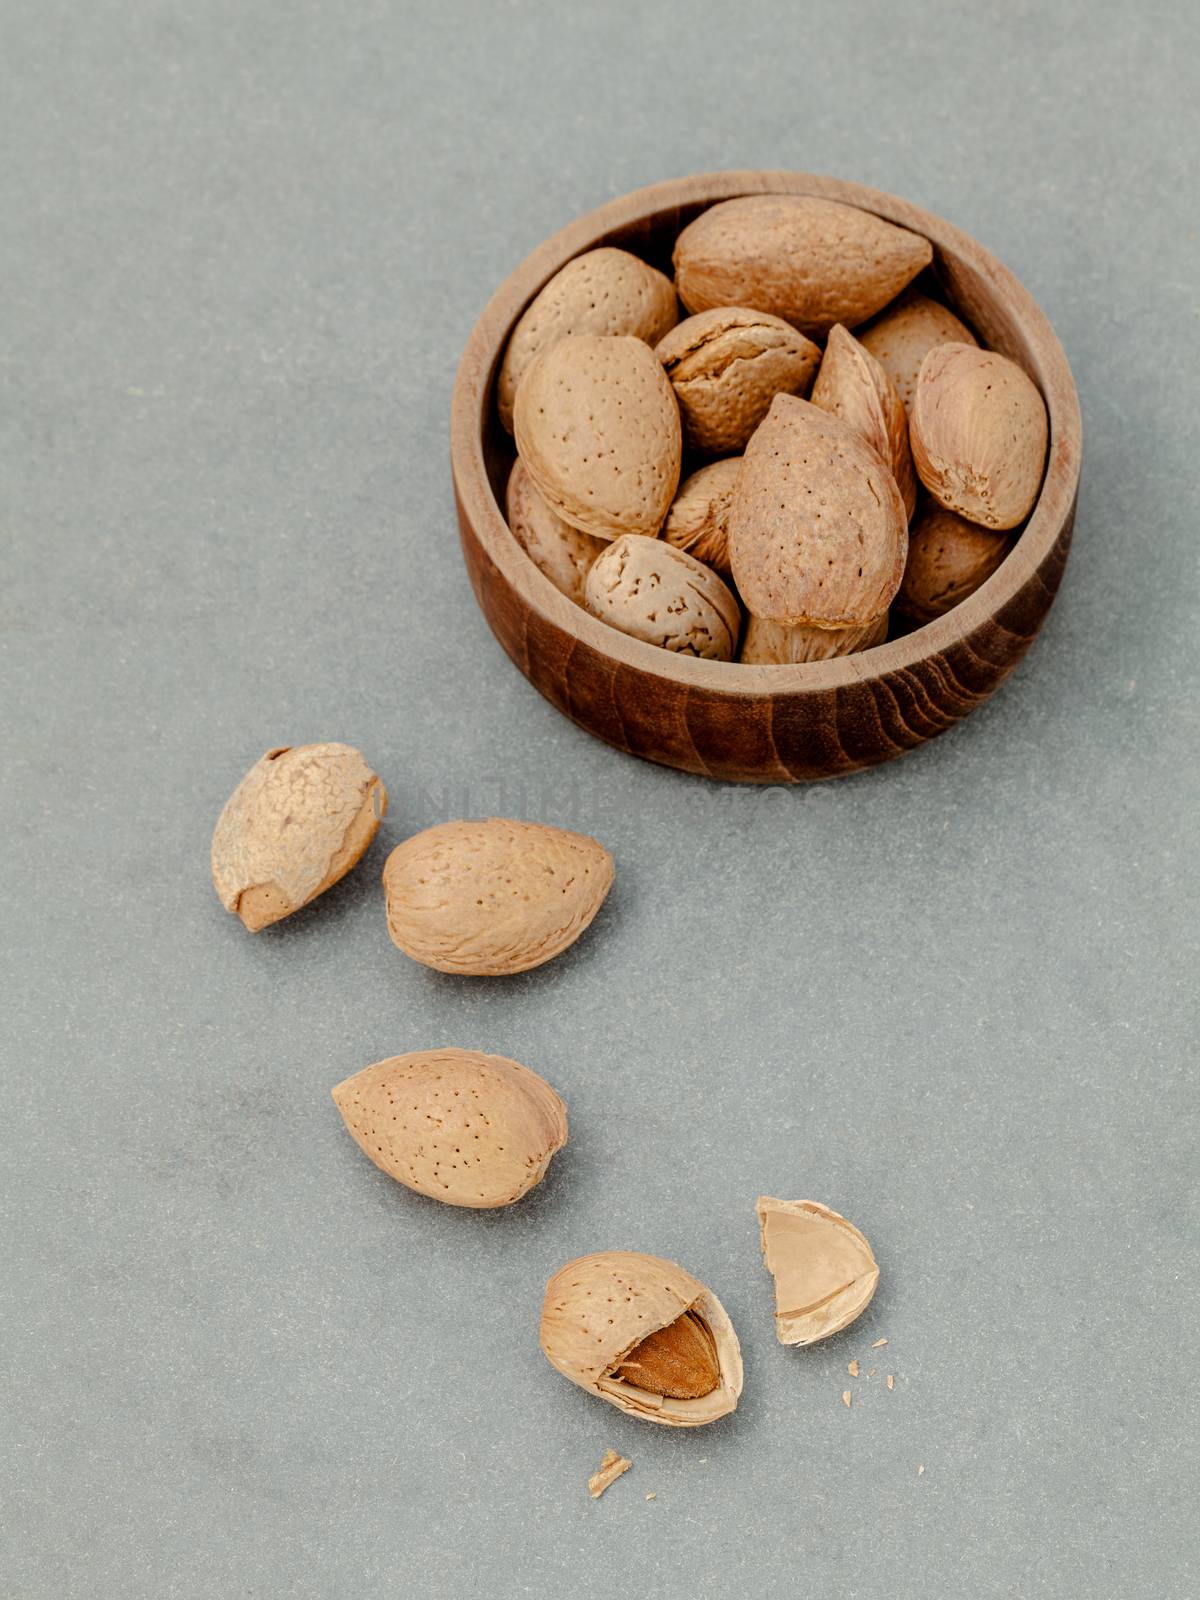 Almonds kernels and whole almonds on concrete background. Whole and chopped almond on concrete background. almond kernels and nutcracker. Selective focus depth of field.